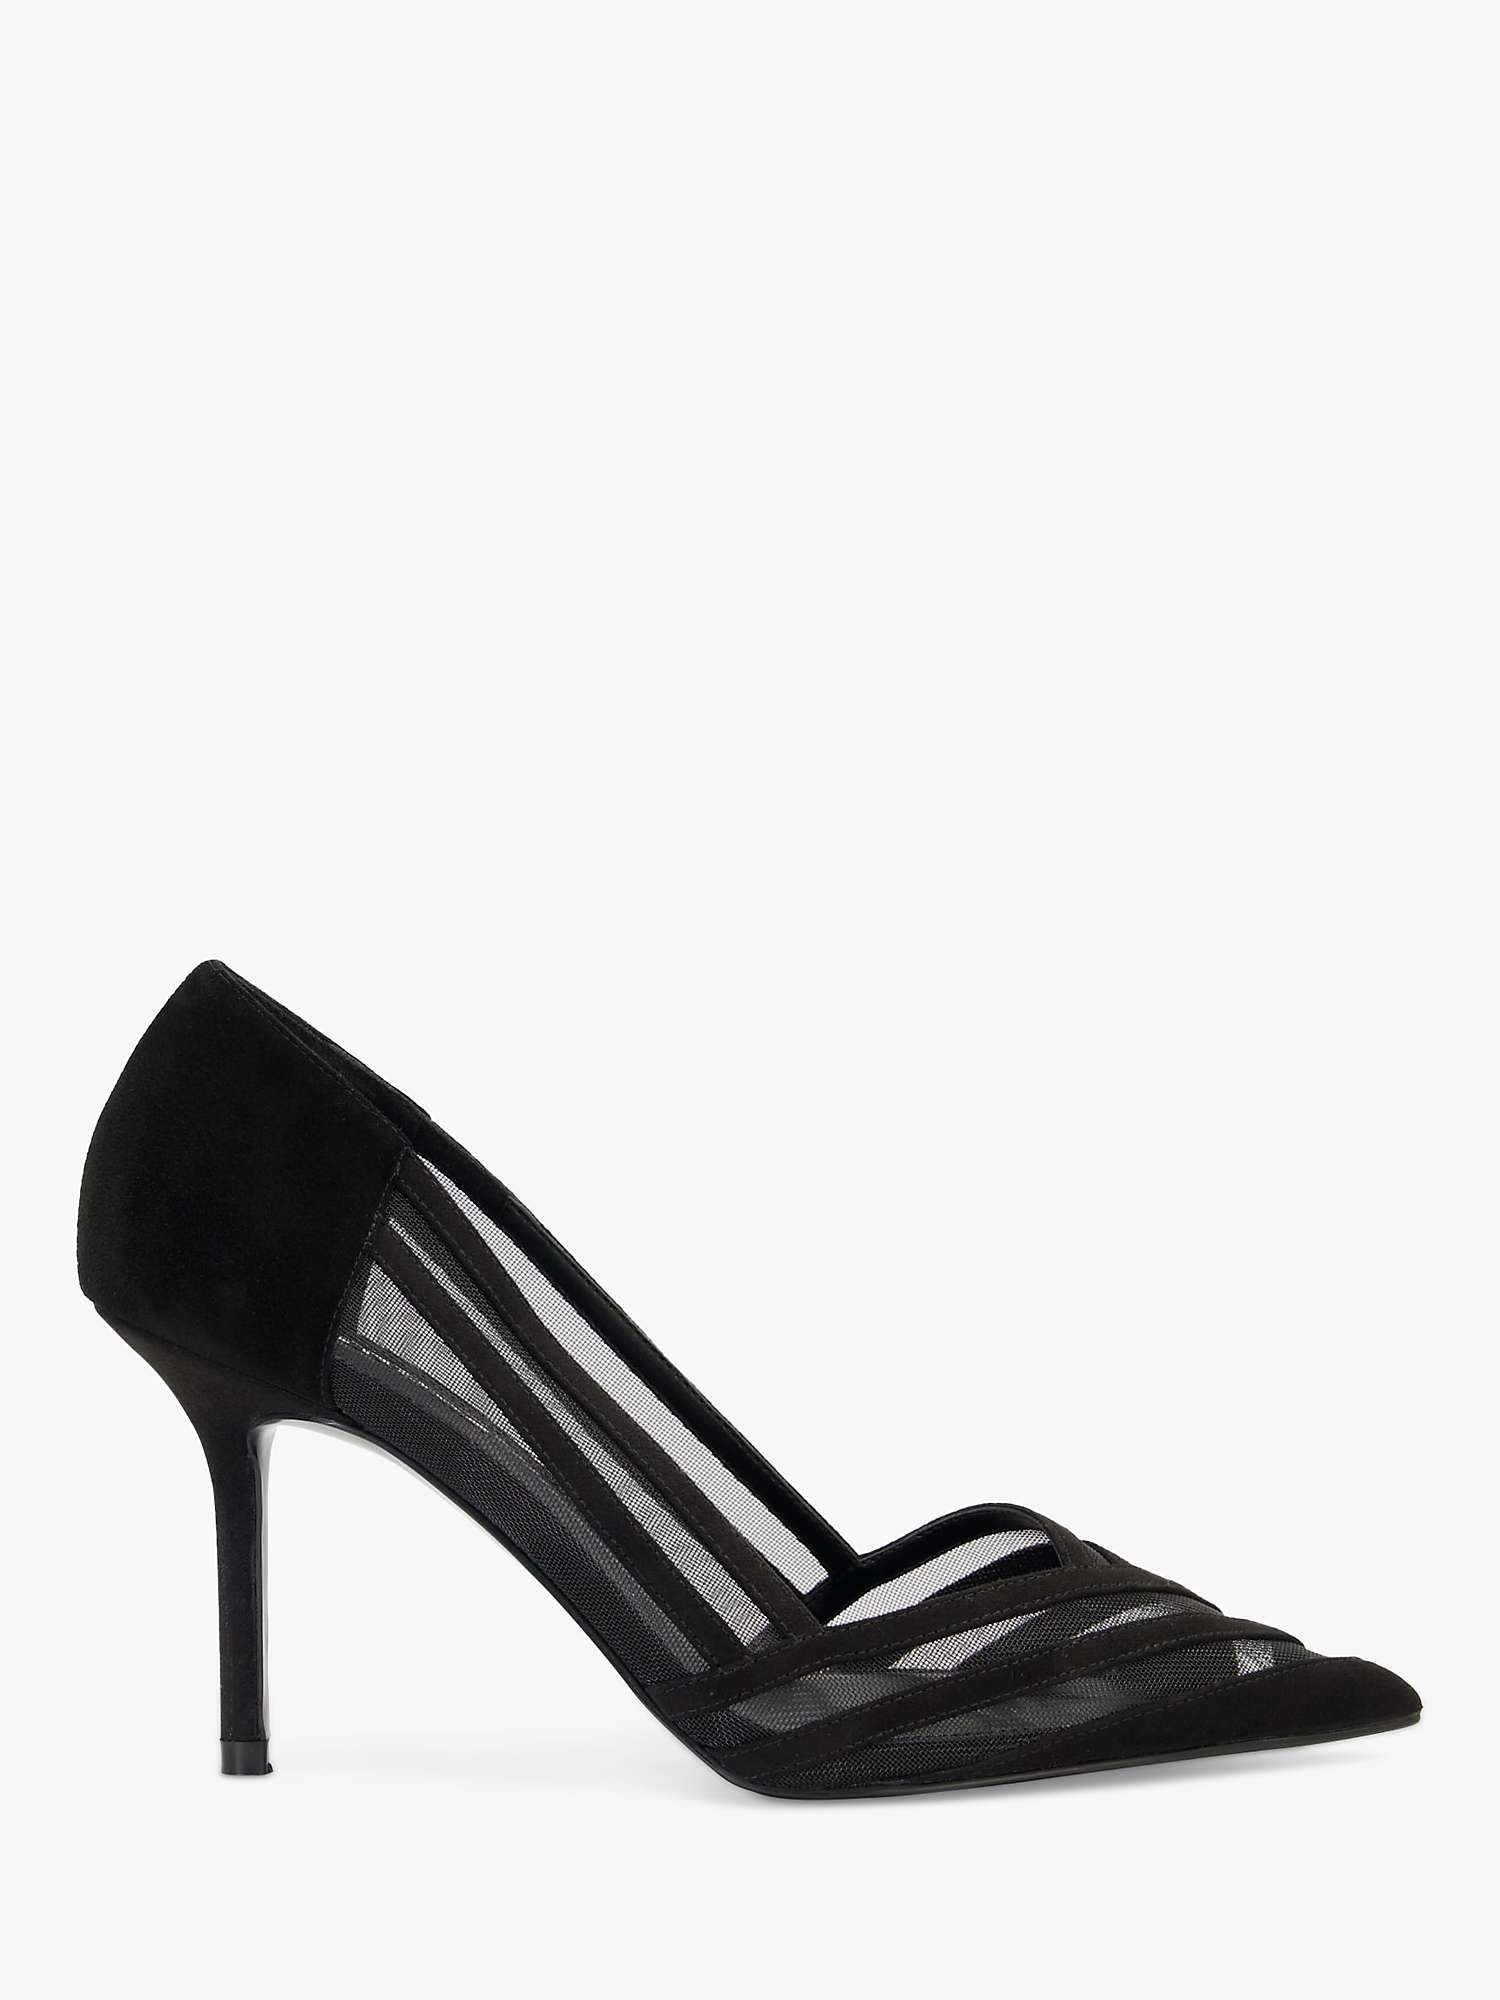 Buy Dune Axis Suede Court Shoes Online at johnlewis.com